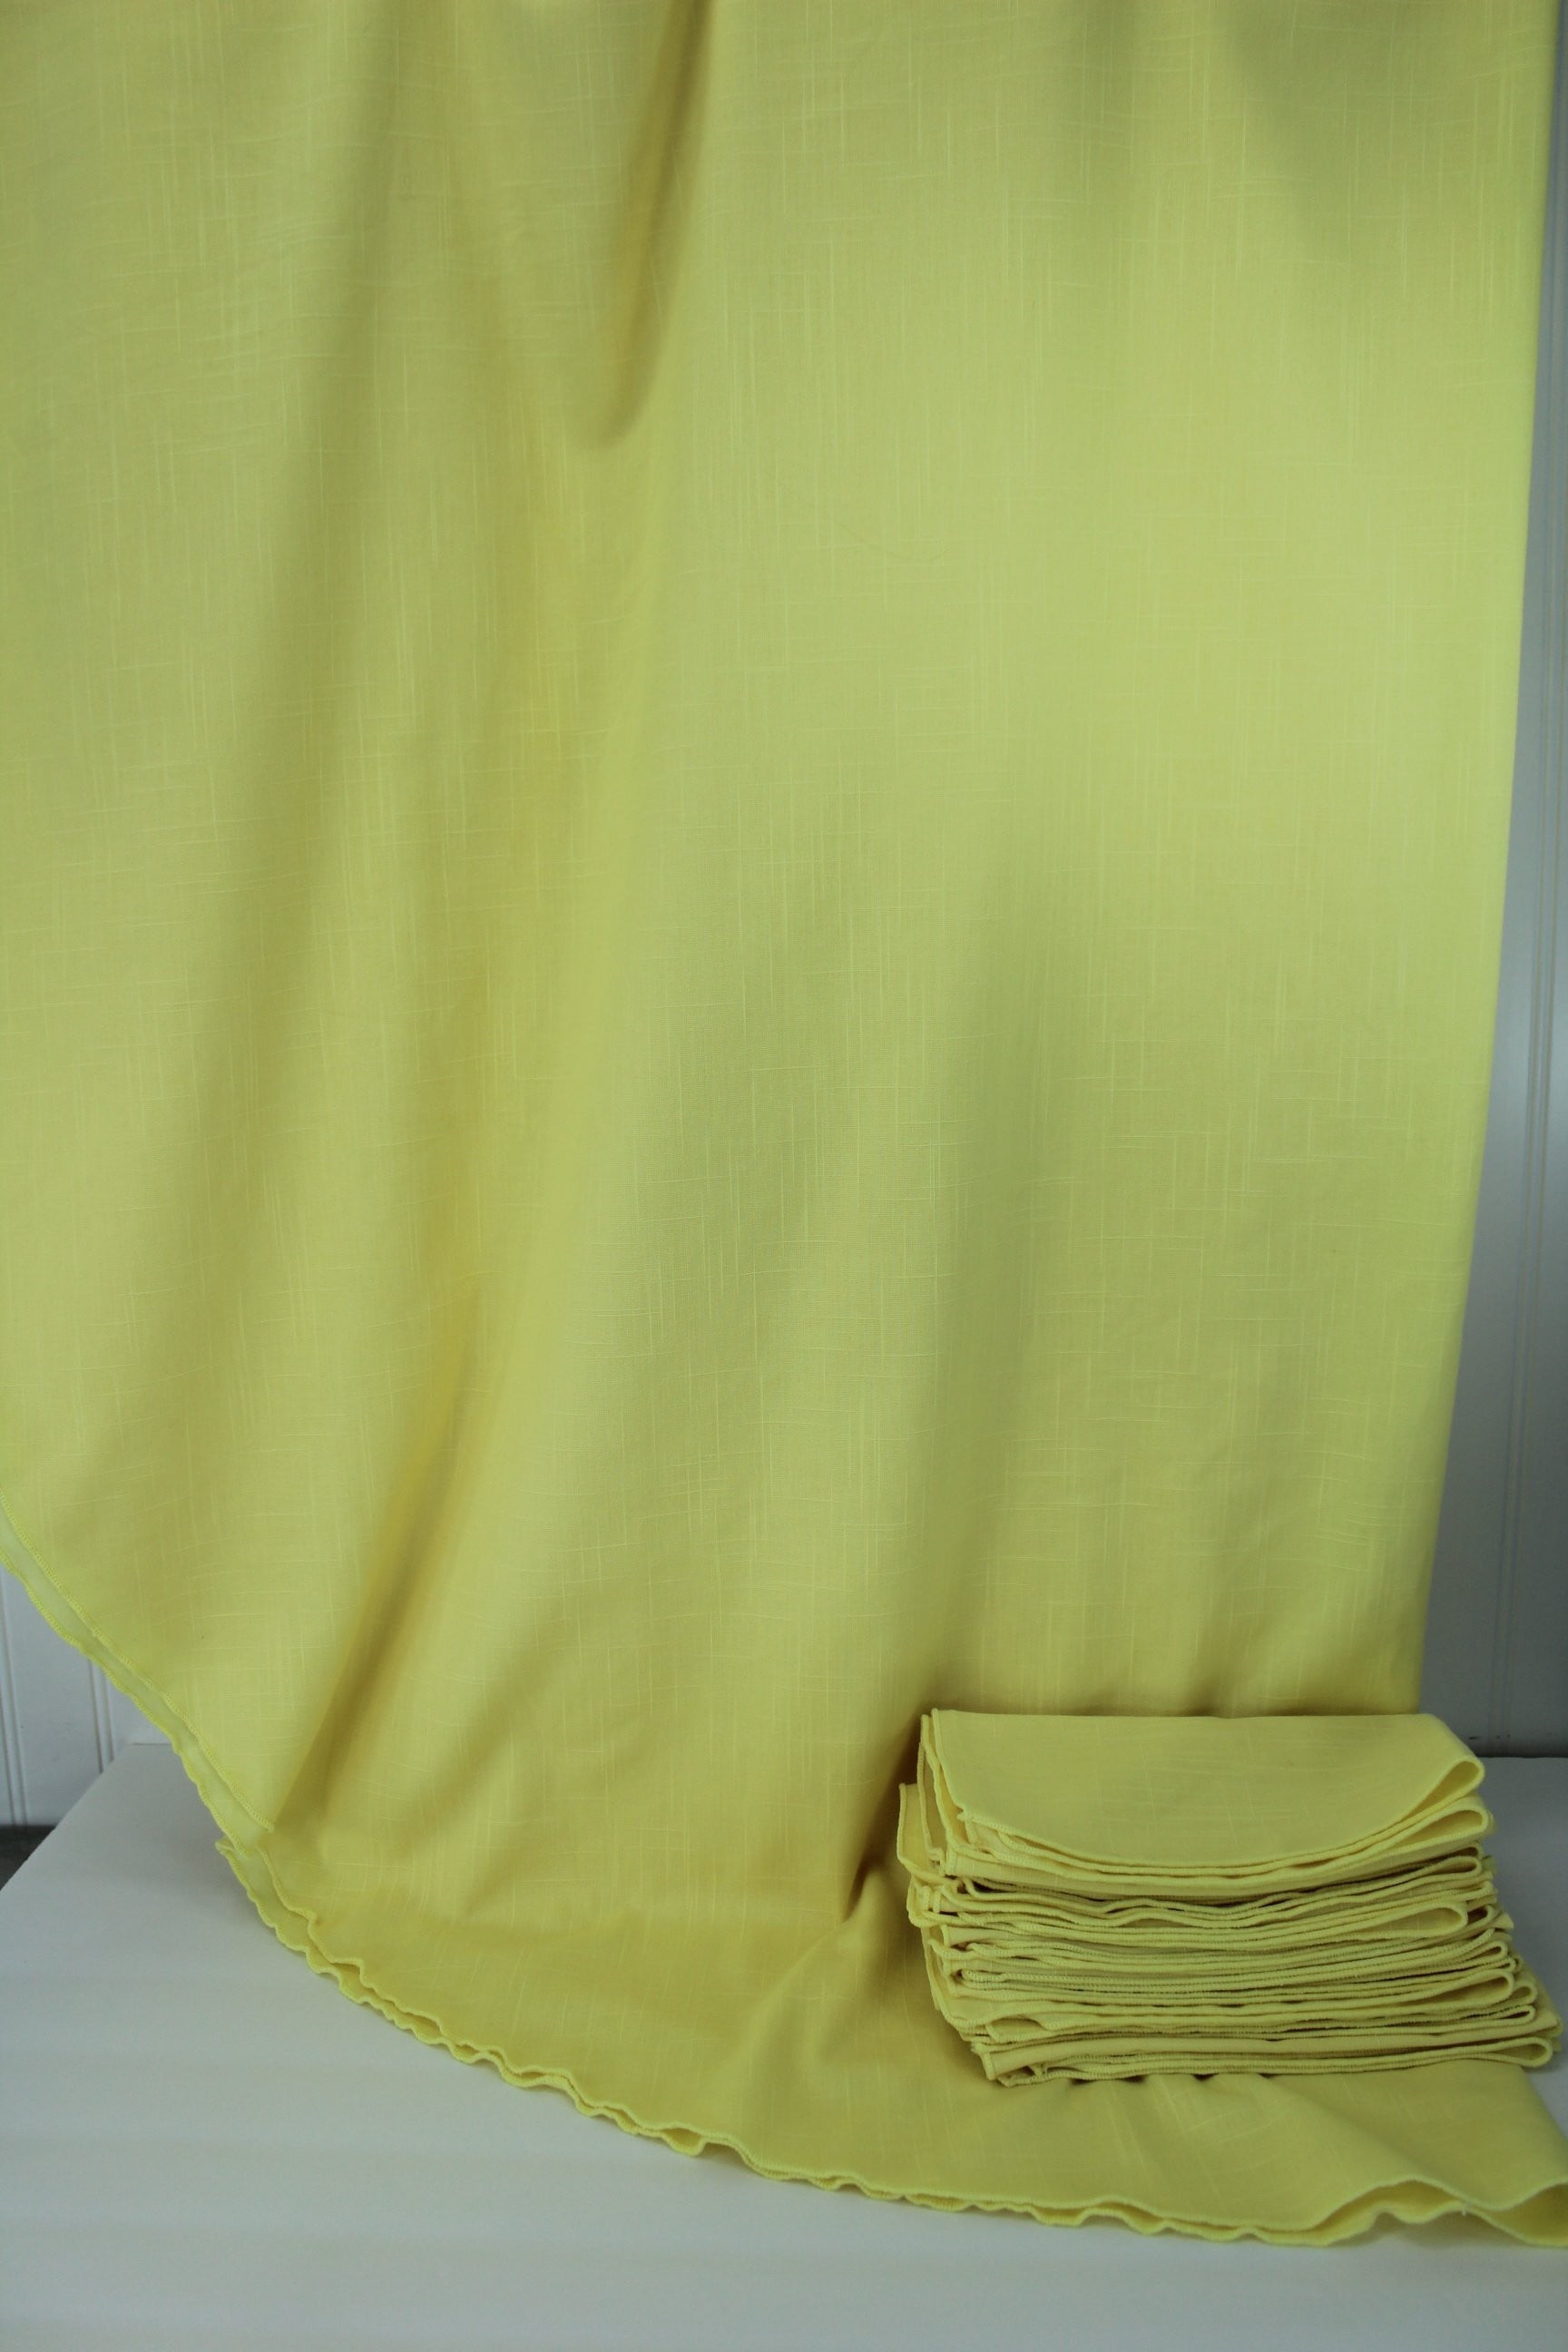 Large Oval EZ Care Tablecloth -10 Napkins - Blend No Iron Fabric lemon yellow bright cheerful